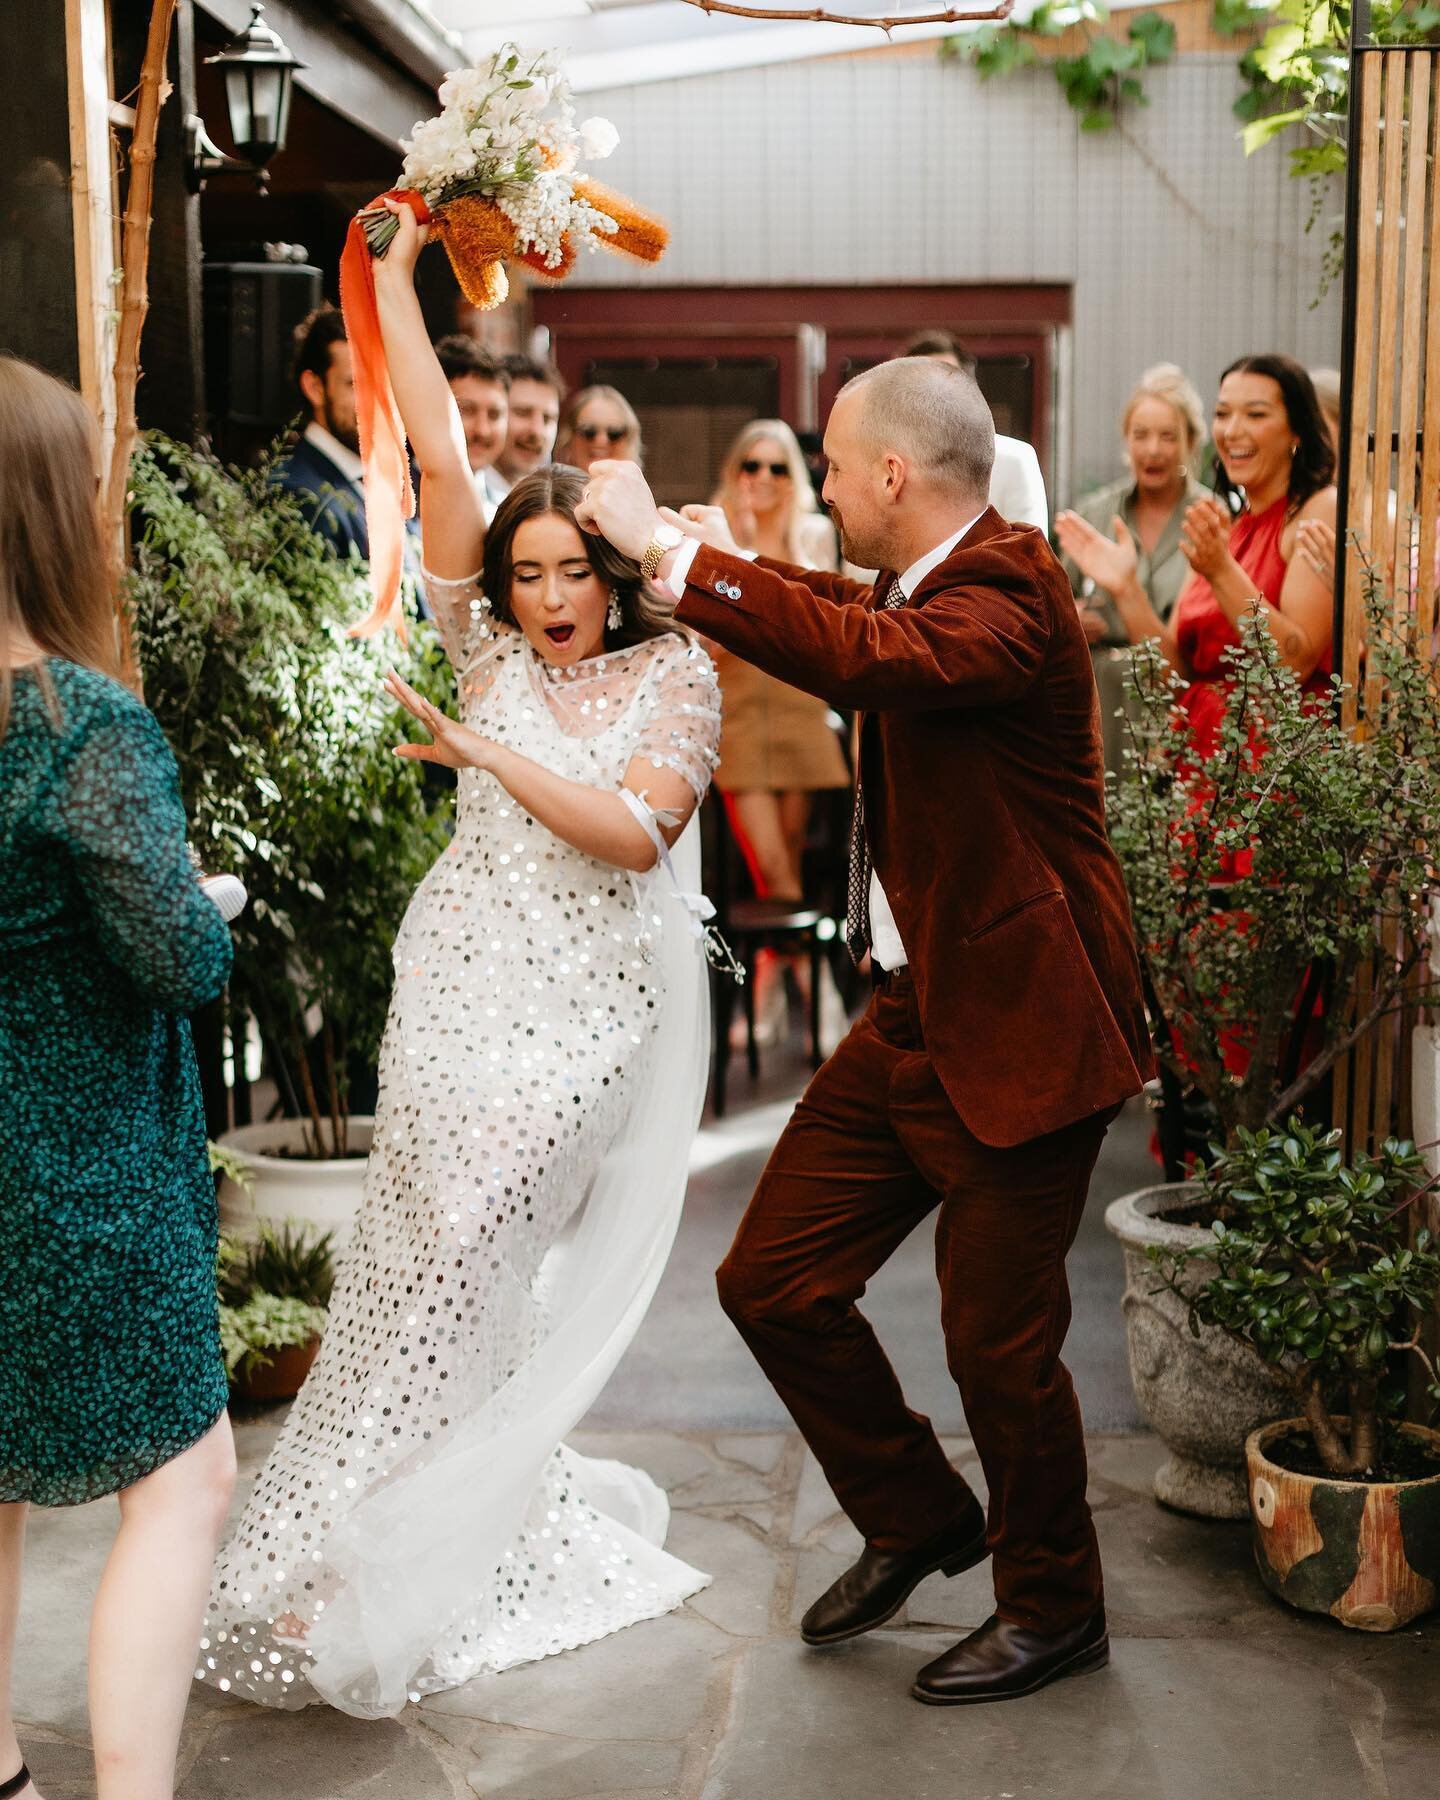 Congratulations to the fabulous Milly and Trent!! Absolutely thrilled to be part of this epic retro wedding giveaway, helping out these lovers with some groovy moves for their First Dance 🪩❤️

Such a privilege to work with such beautiful humans&hell